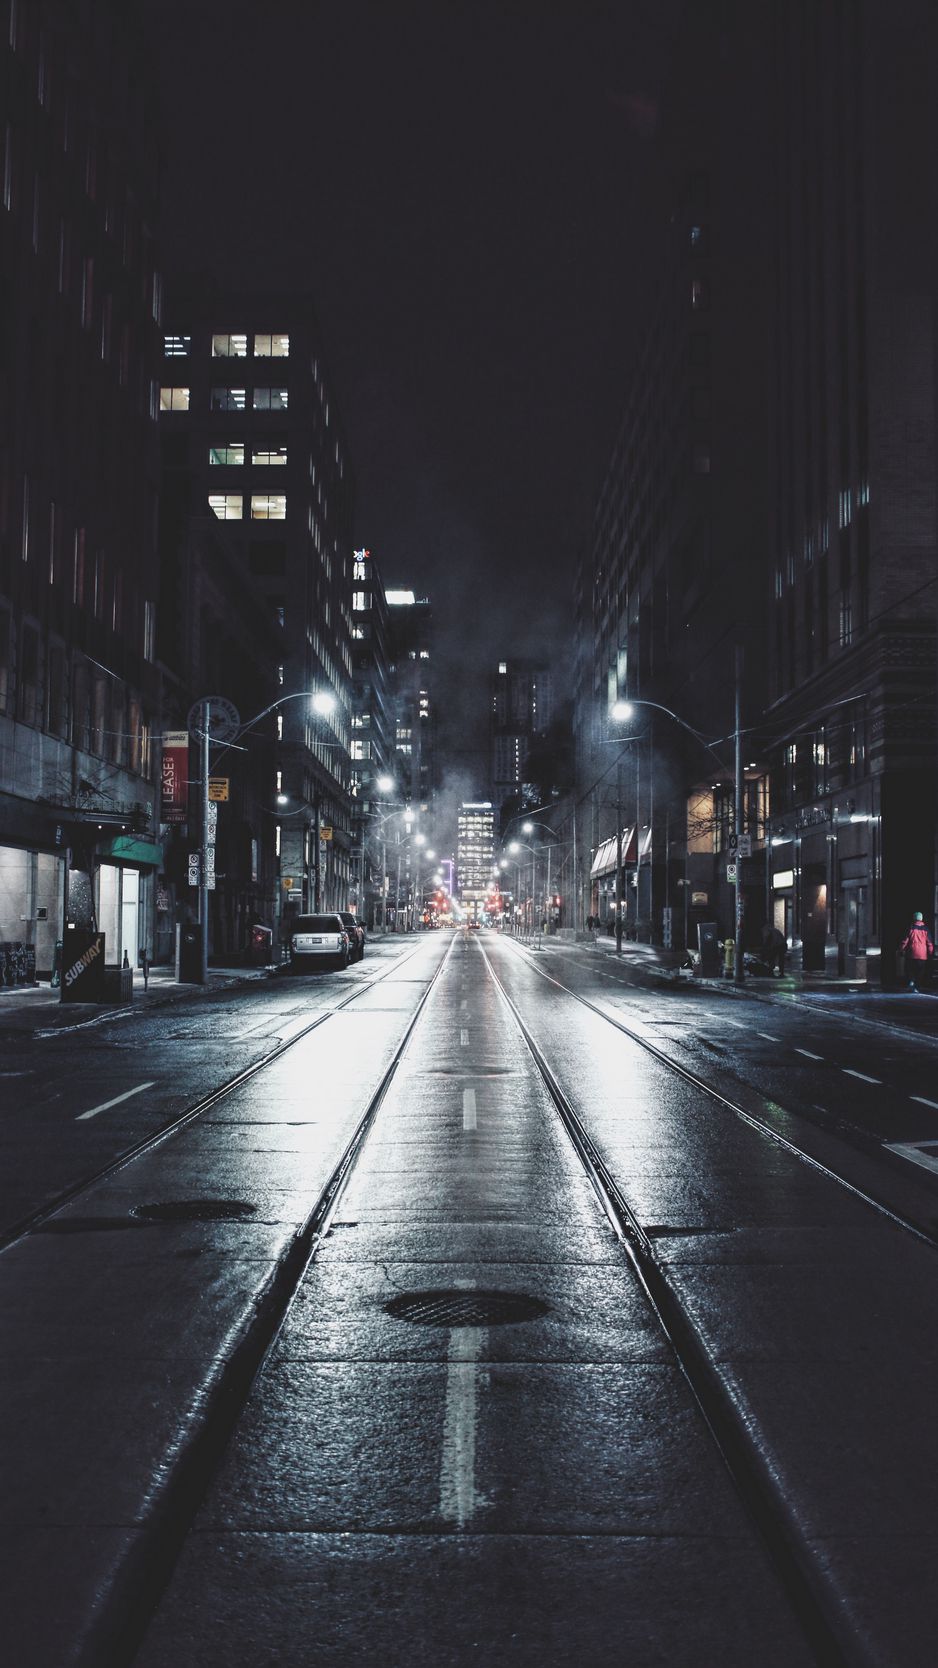 Download wallpaper 938x1668 night city, street, road, buildings, toronto,  canada iphone 8/7/6s/6 for parallax hd background